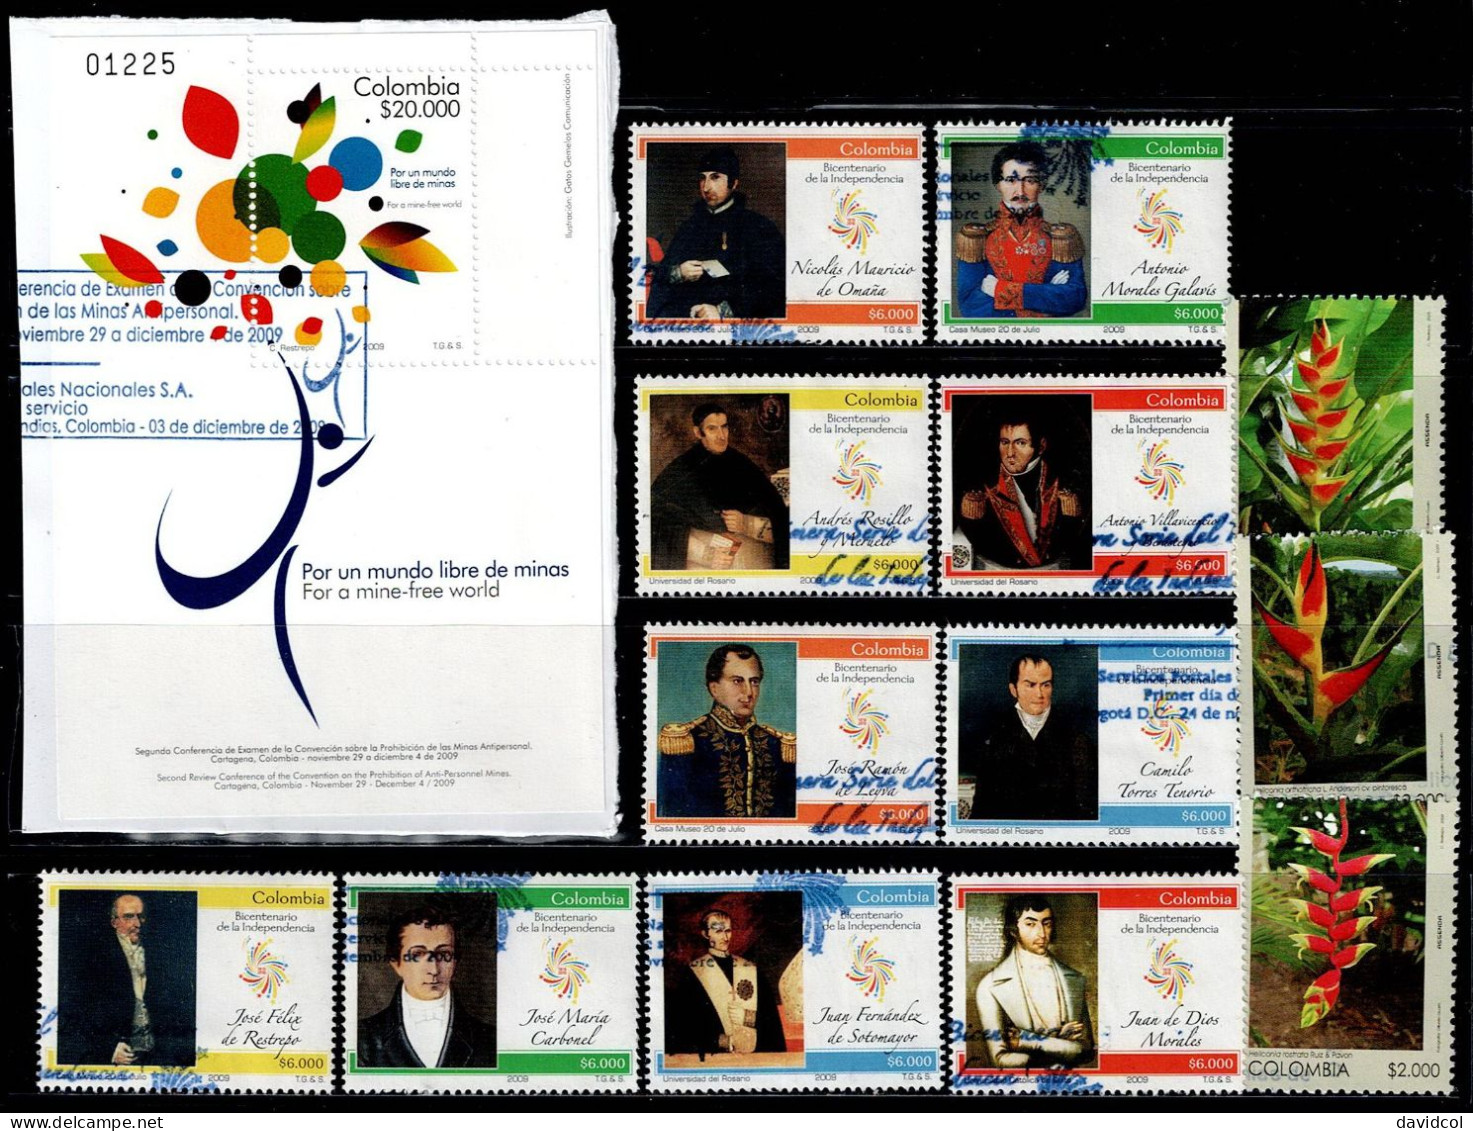 0161AB-COLOMBIA-2009-HCV - USED POSTAL WITH SCARCES-2 COMPLETE SETS - Colombie